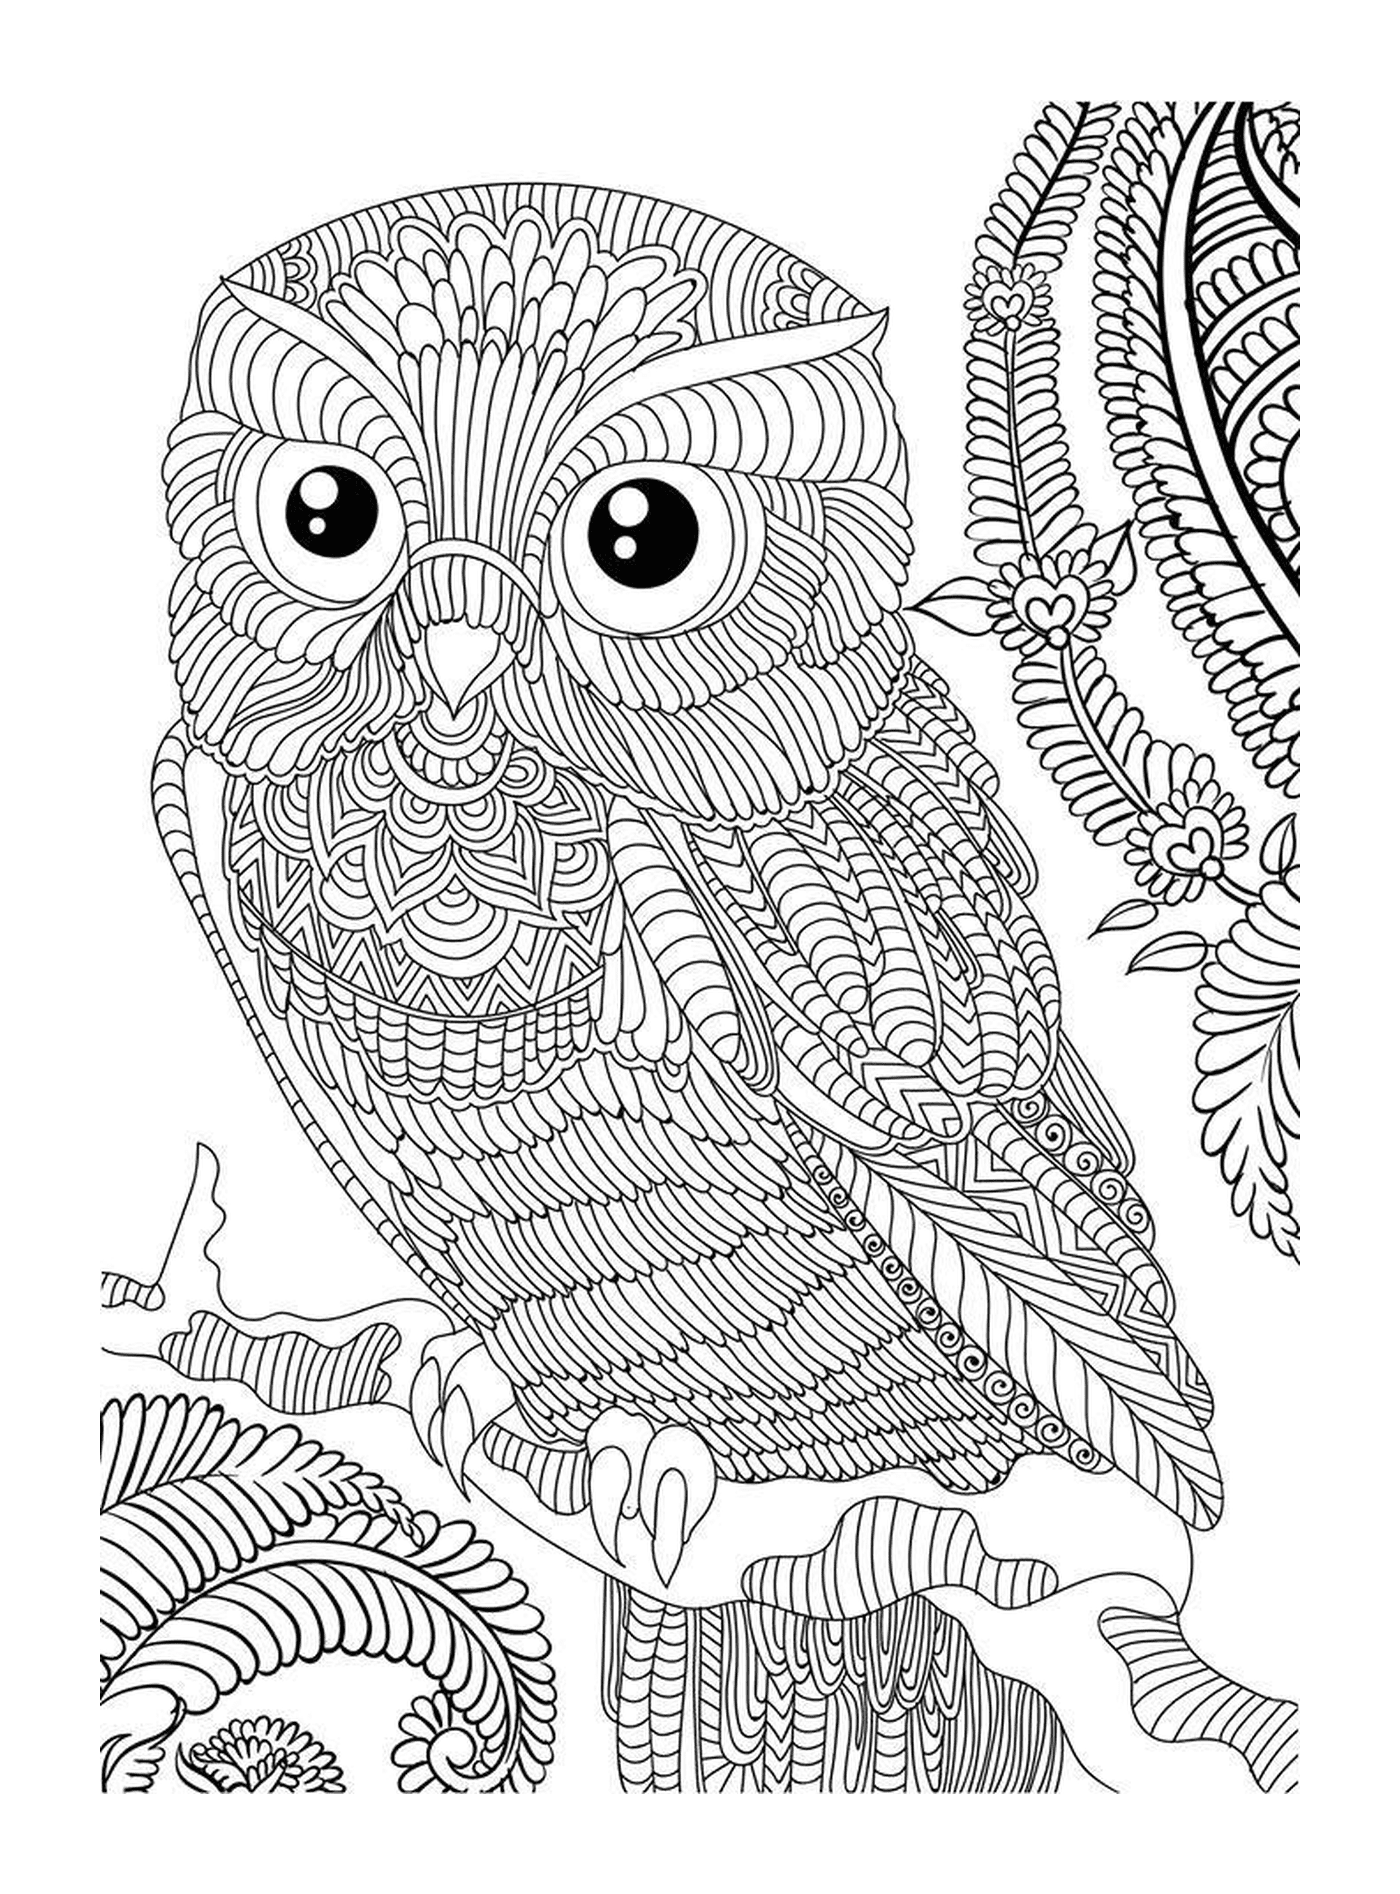  An owl on a branch 